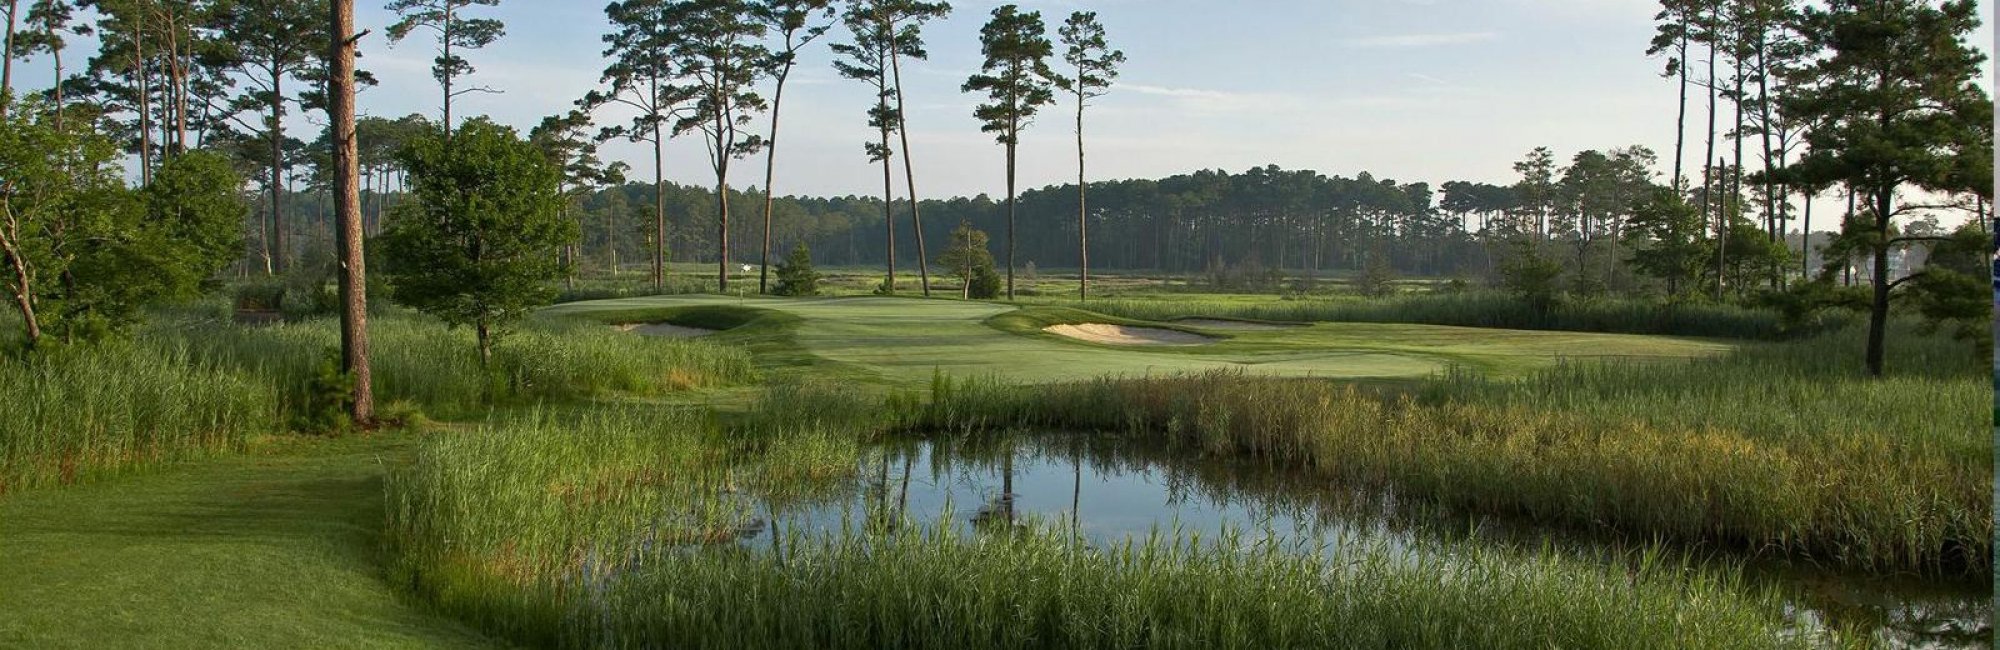 golf course surrounded by trees with marsh